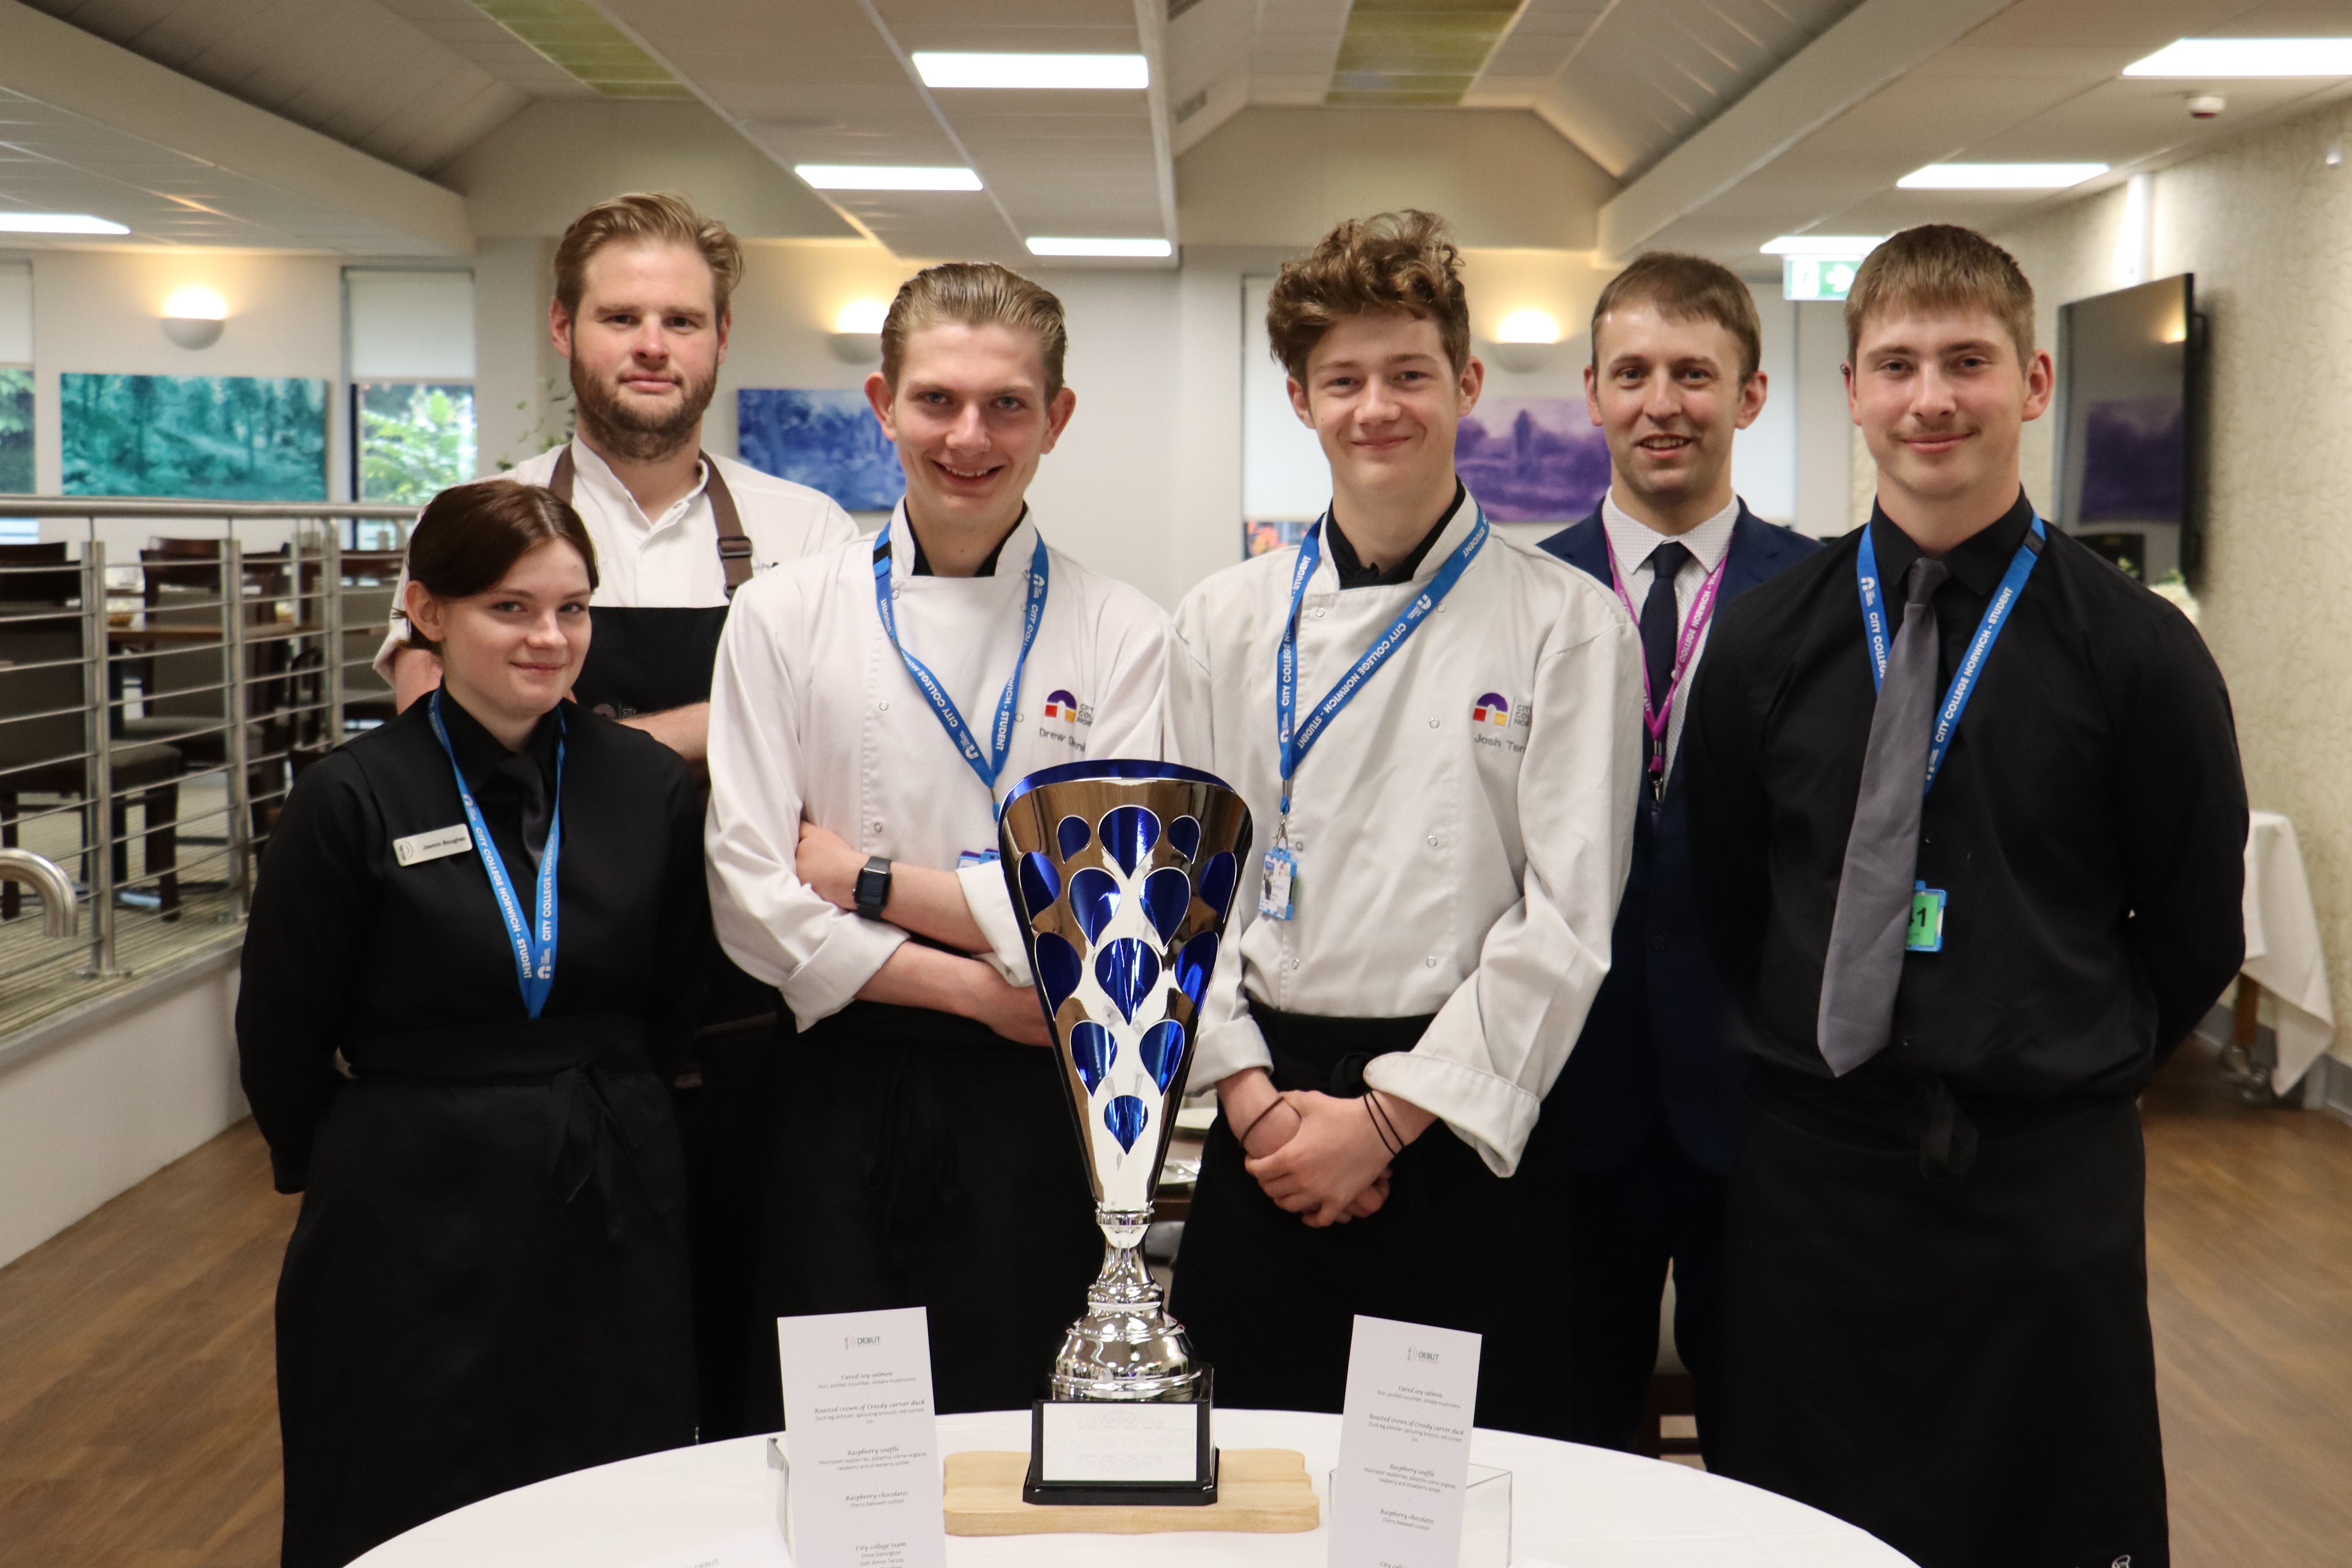 Students in chef whites posing with their trophy